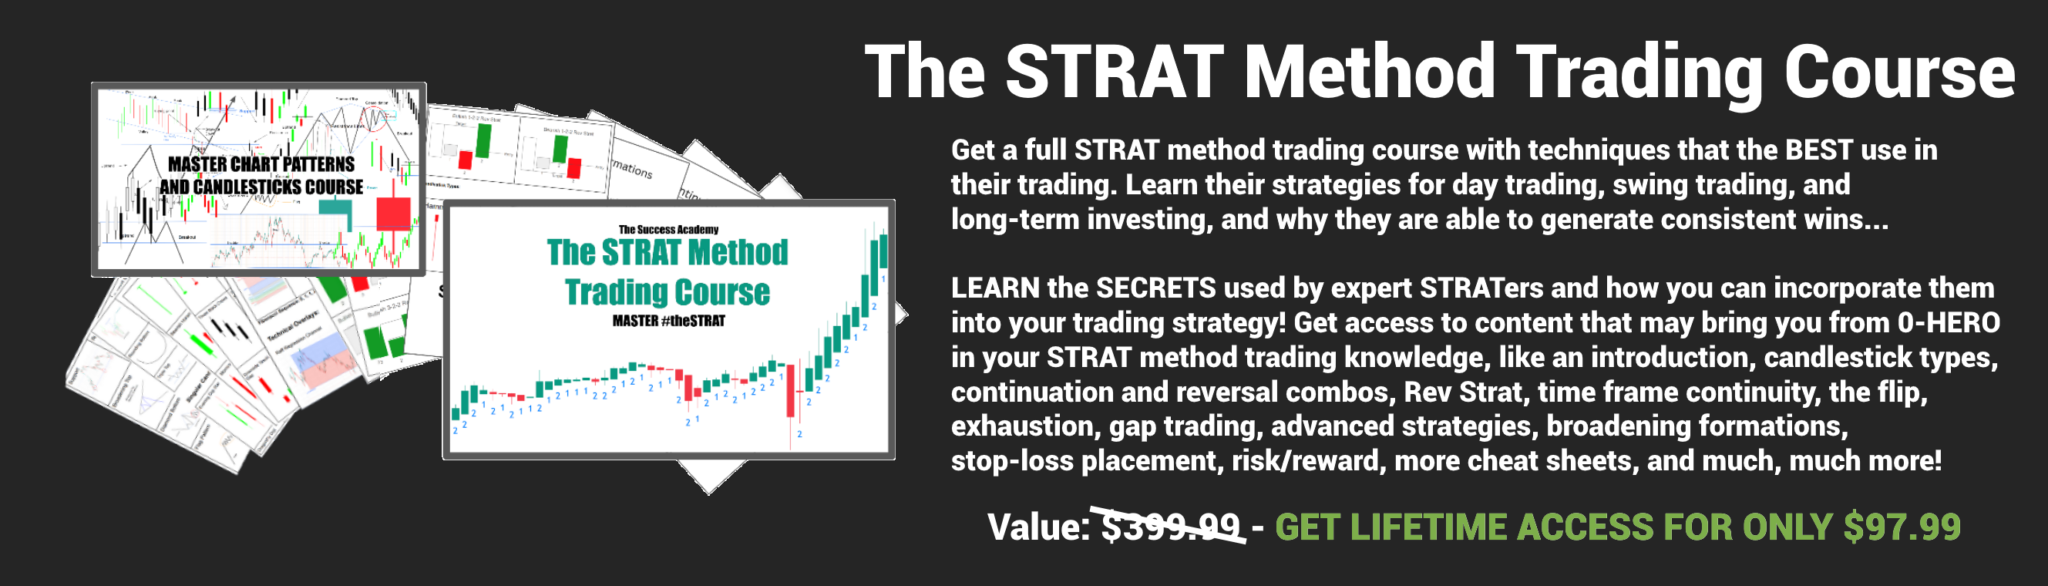 The STRAT Method Trading Course with techniques that the BEST use in their trading. Includes secrets used by the experts - get $399.99 Value for only $97.99